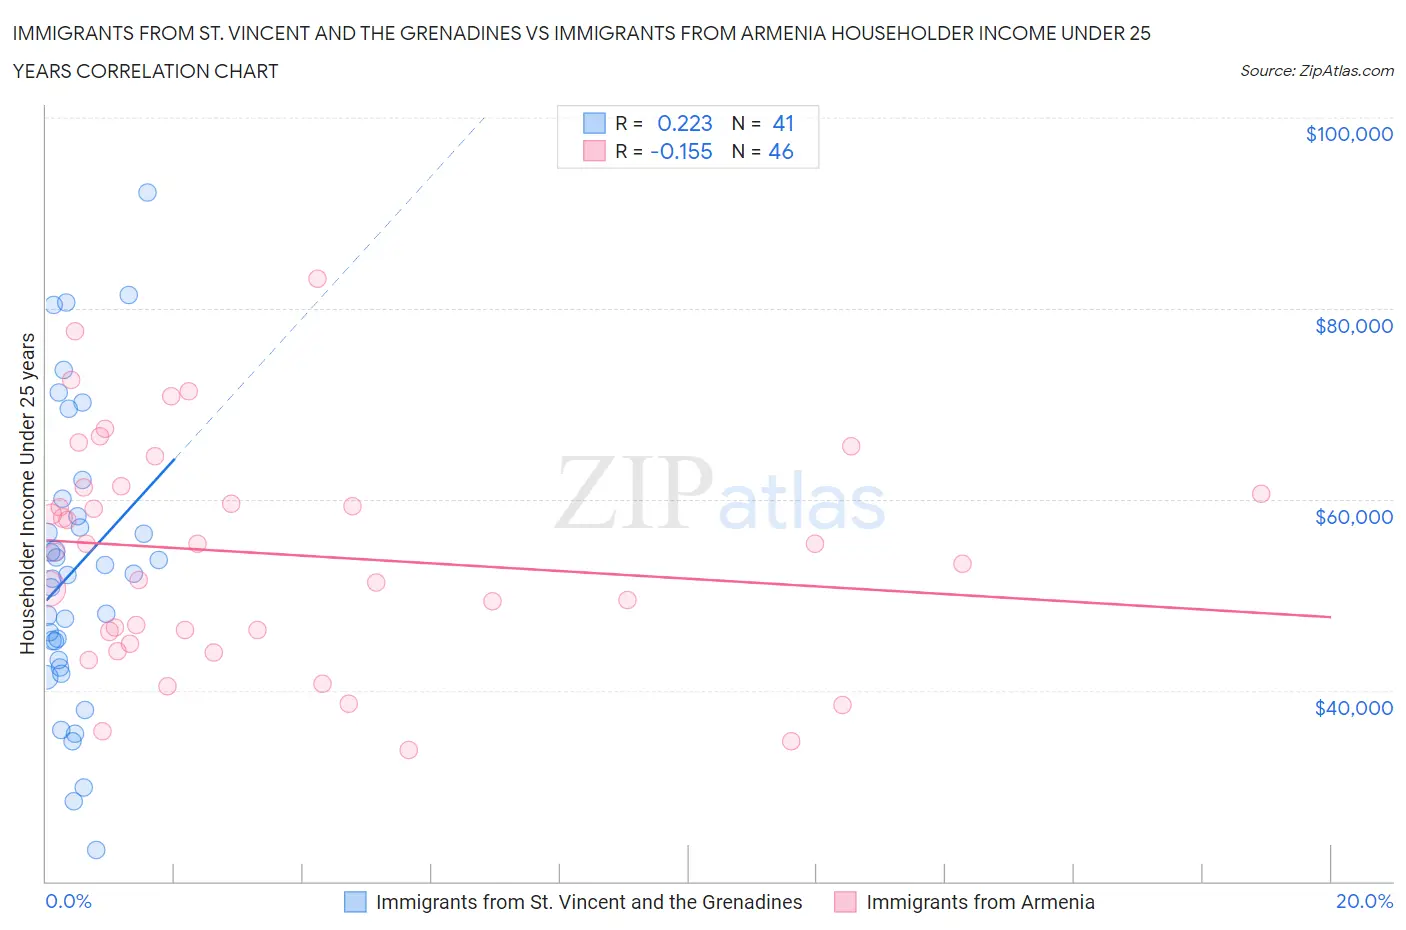 Immigrants from St. Vincent and the Grenadines vs Immigrants from Armenia Householder Income Under 25 years